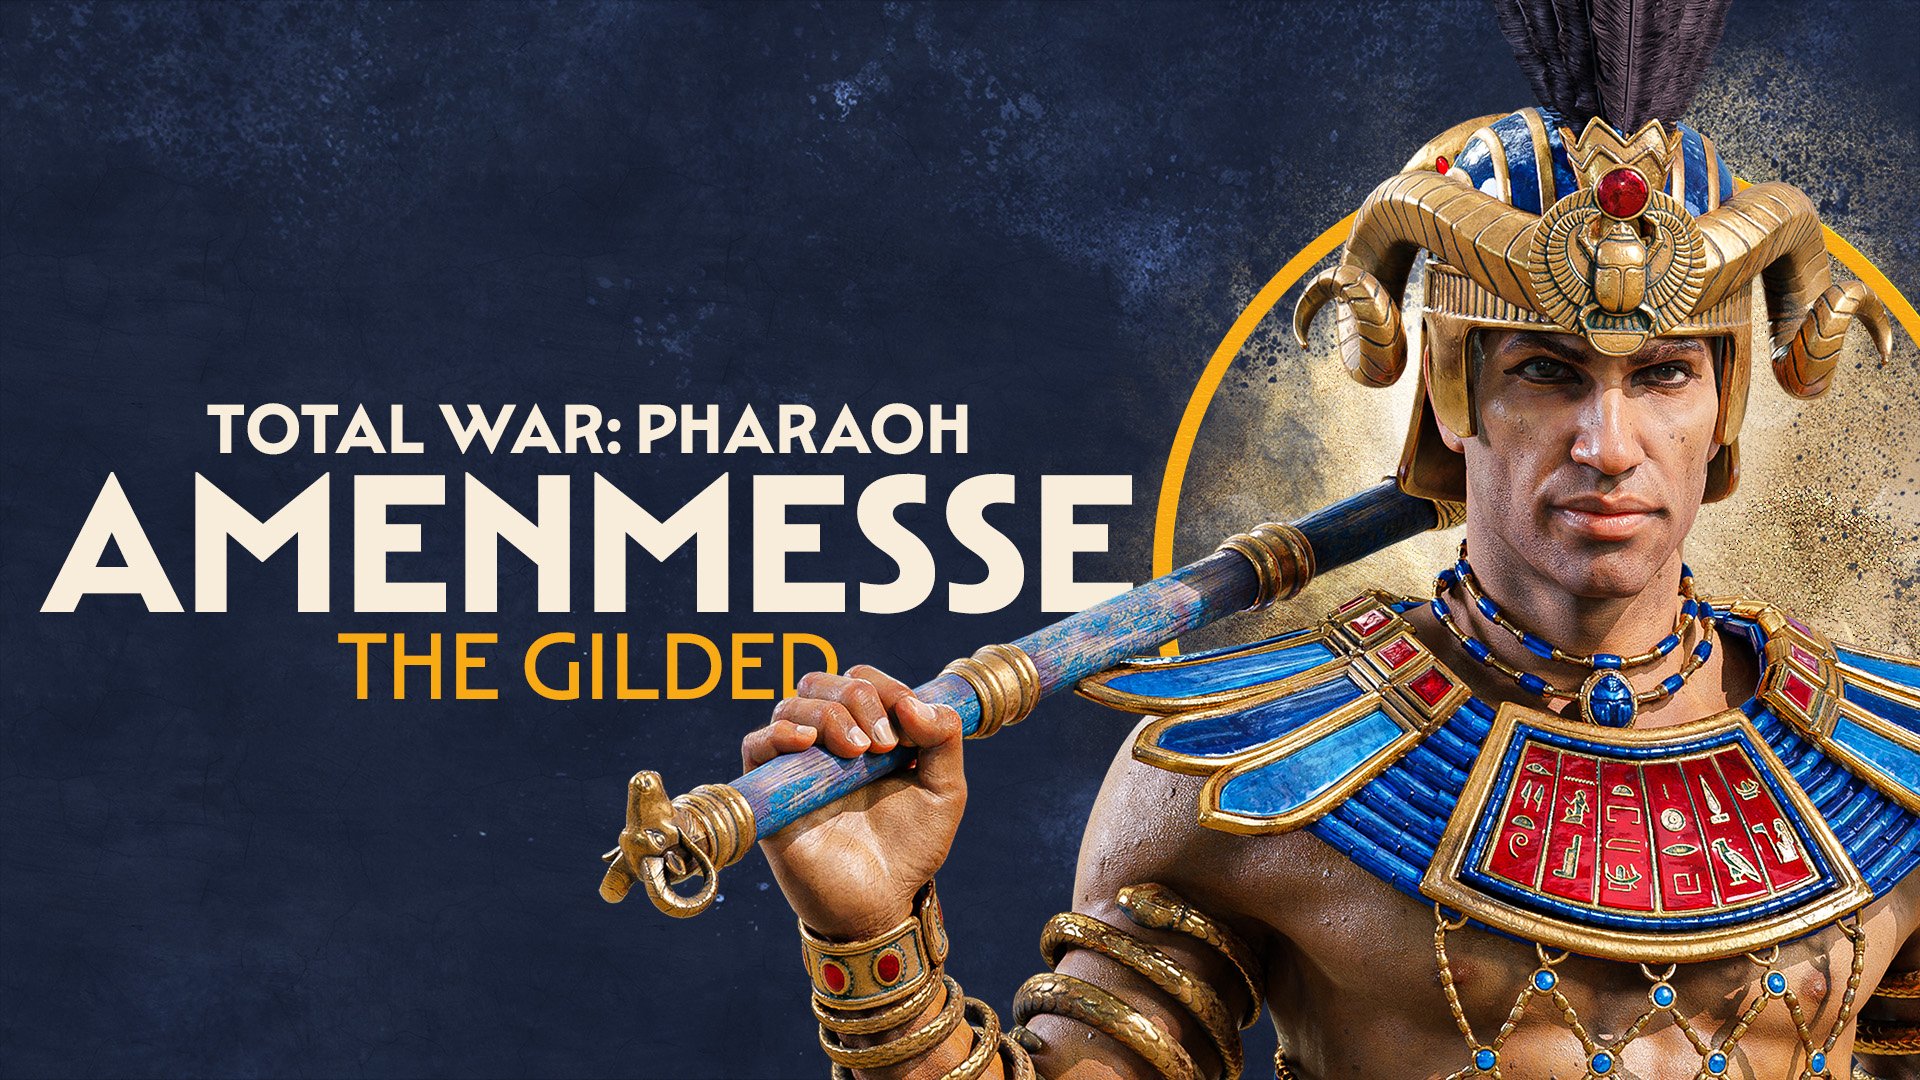 Total War our second Egyptian faction leader: Amenmesse. Once standing as presumptive heir to Merneptah's throne, his ambition to stake his claim is matched only by his access to